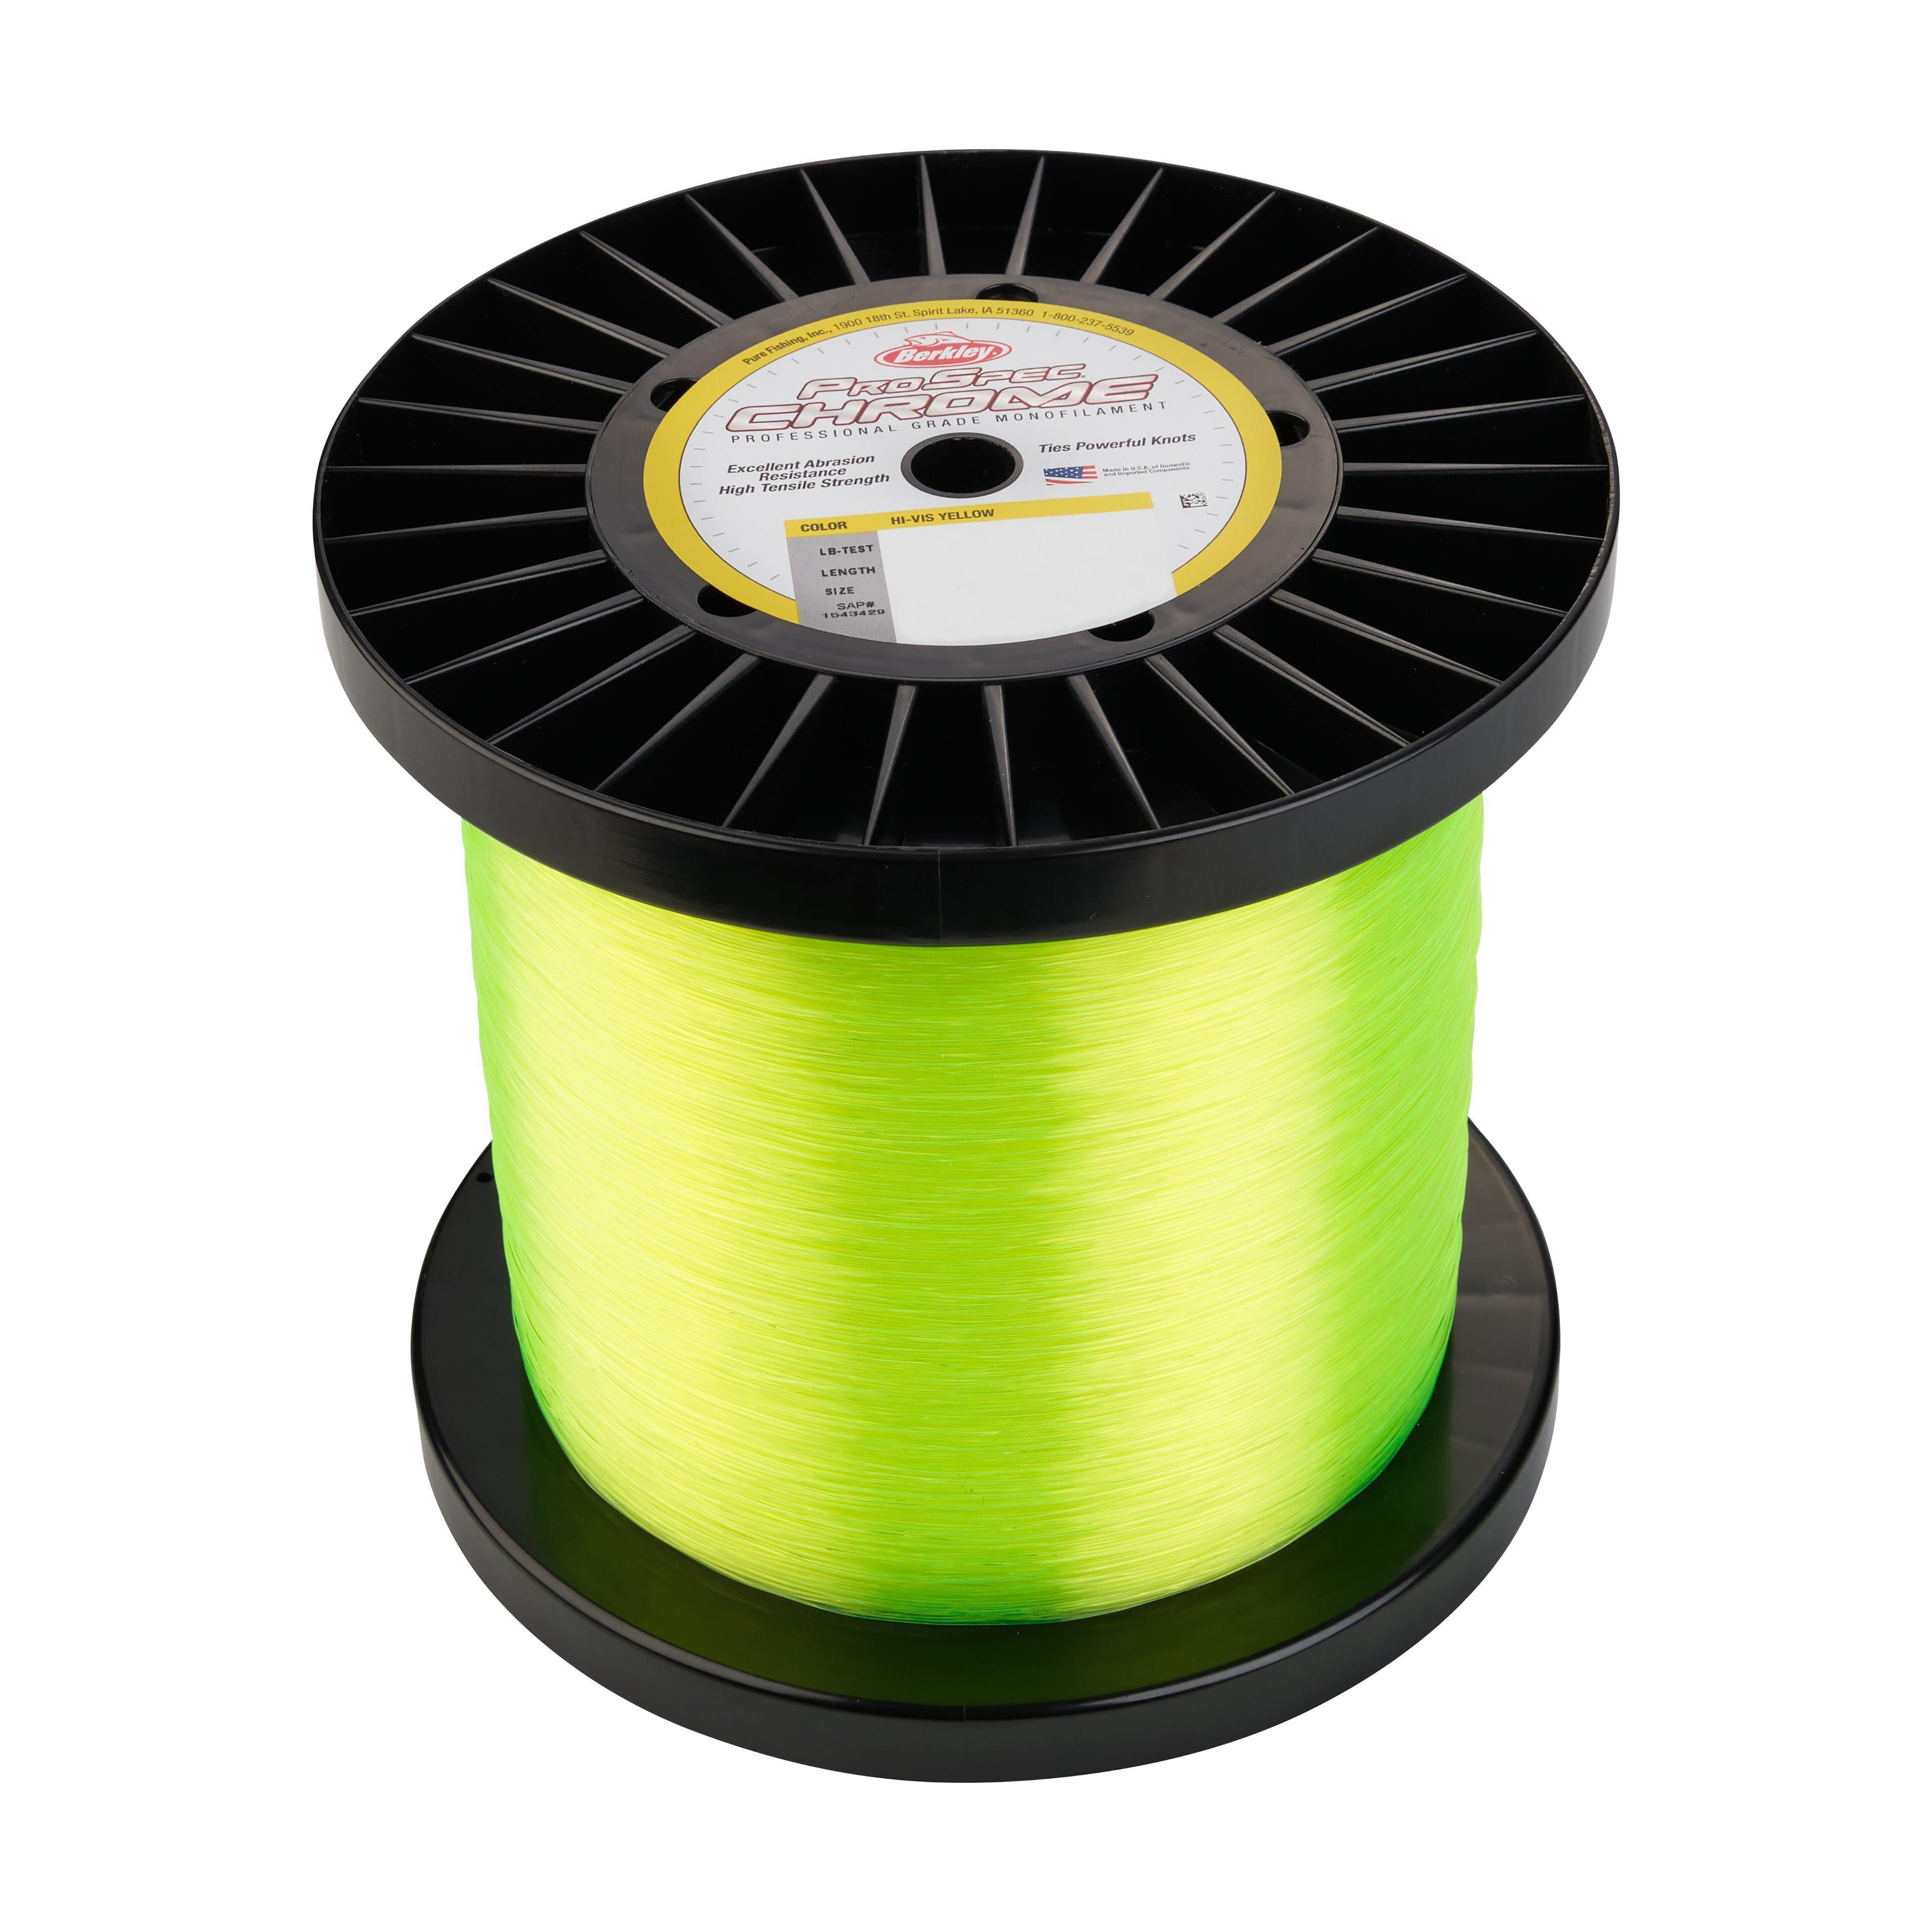 Berkley ProSpec Chrome Monofilament Fishing Line 100Lb 1350yds C  [HNR4475-PSC3100-15] - $96.99 : Almost Alive Lures, The best there ever was.